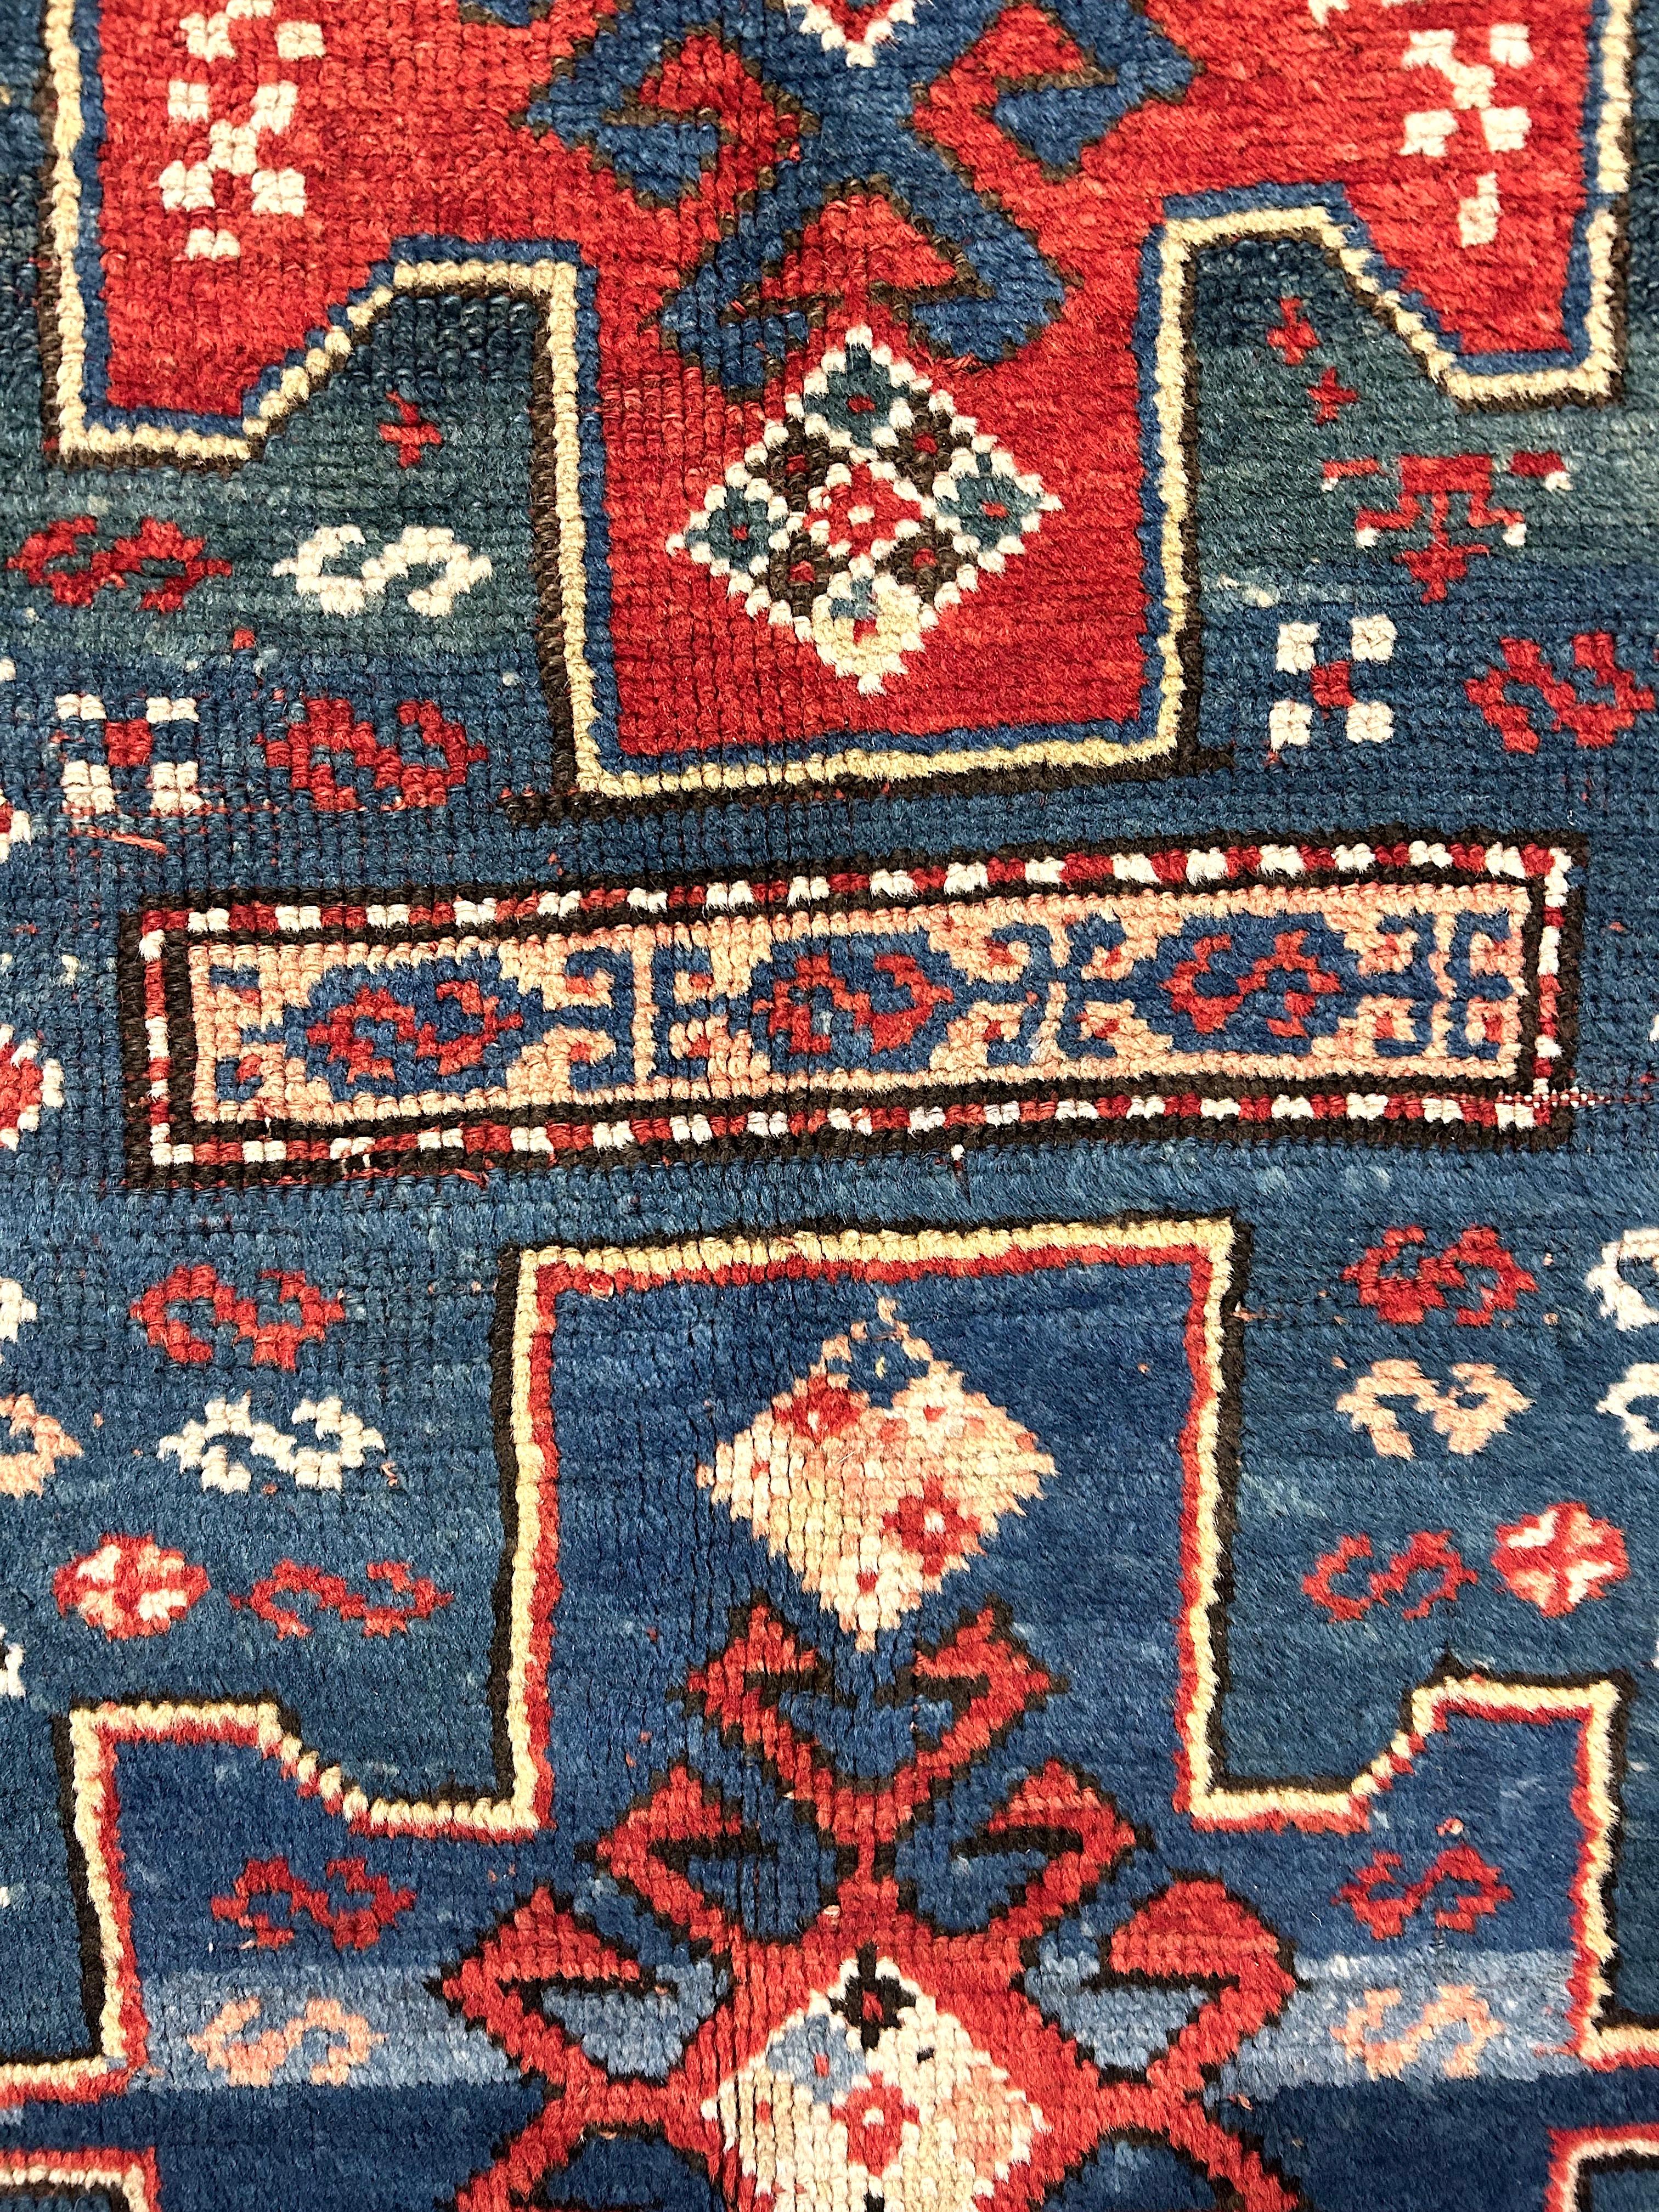 This dramatic and beautiful antique Kazak rug from the south Caucasus region has a composed, yet folky quality, with a hard to find blue/green field scattered with typical motifs, several animals and three large medallions.  The painterly quality of